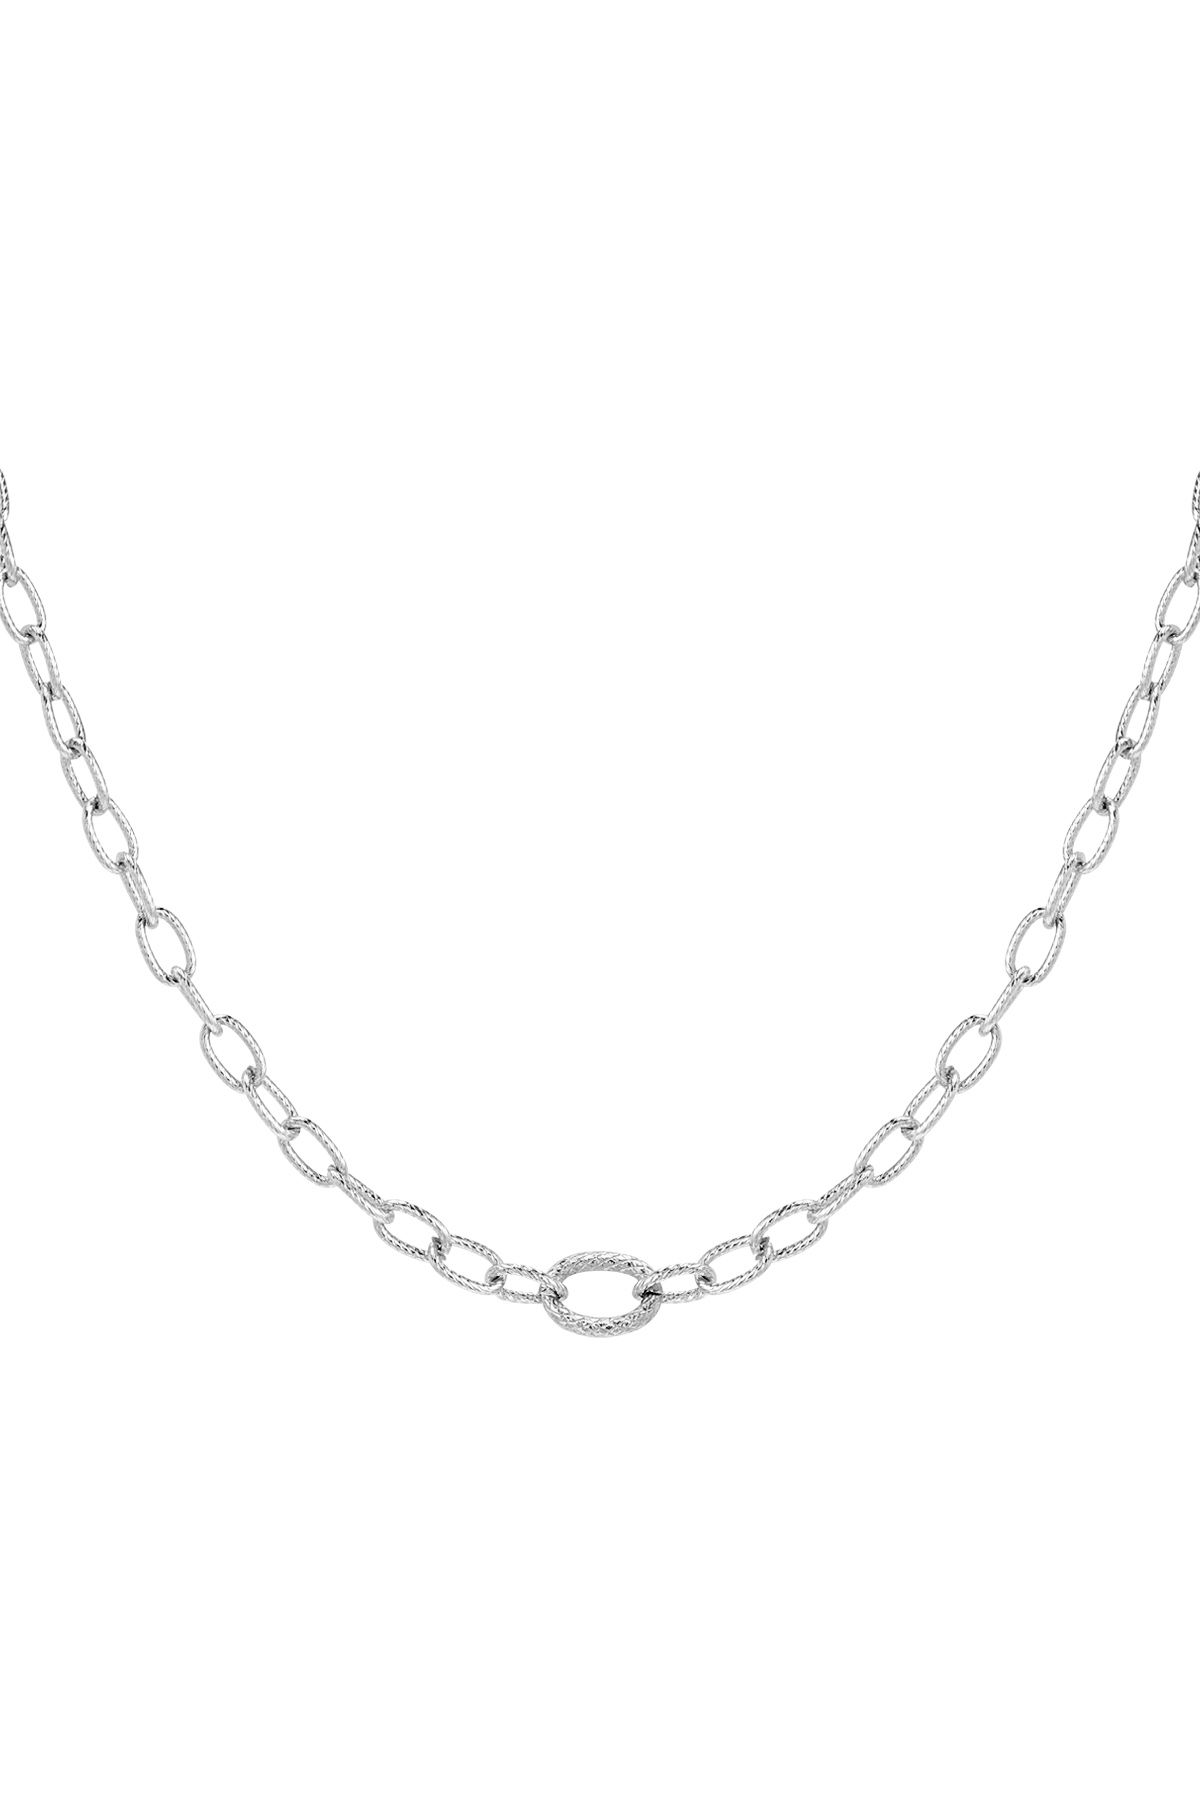 Link chain with structure - Silver Stainless Steel 